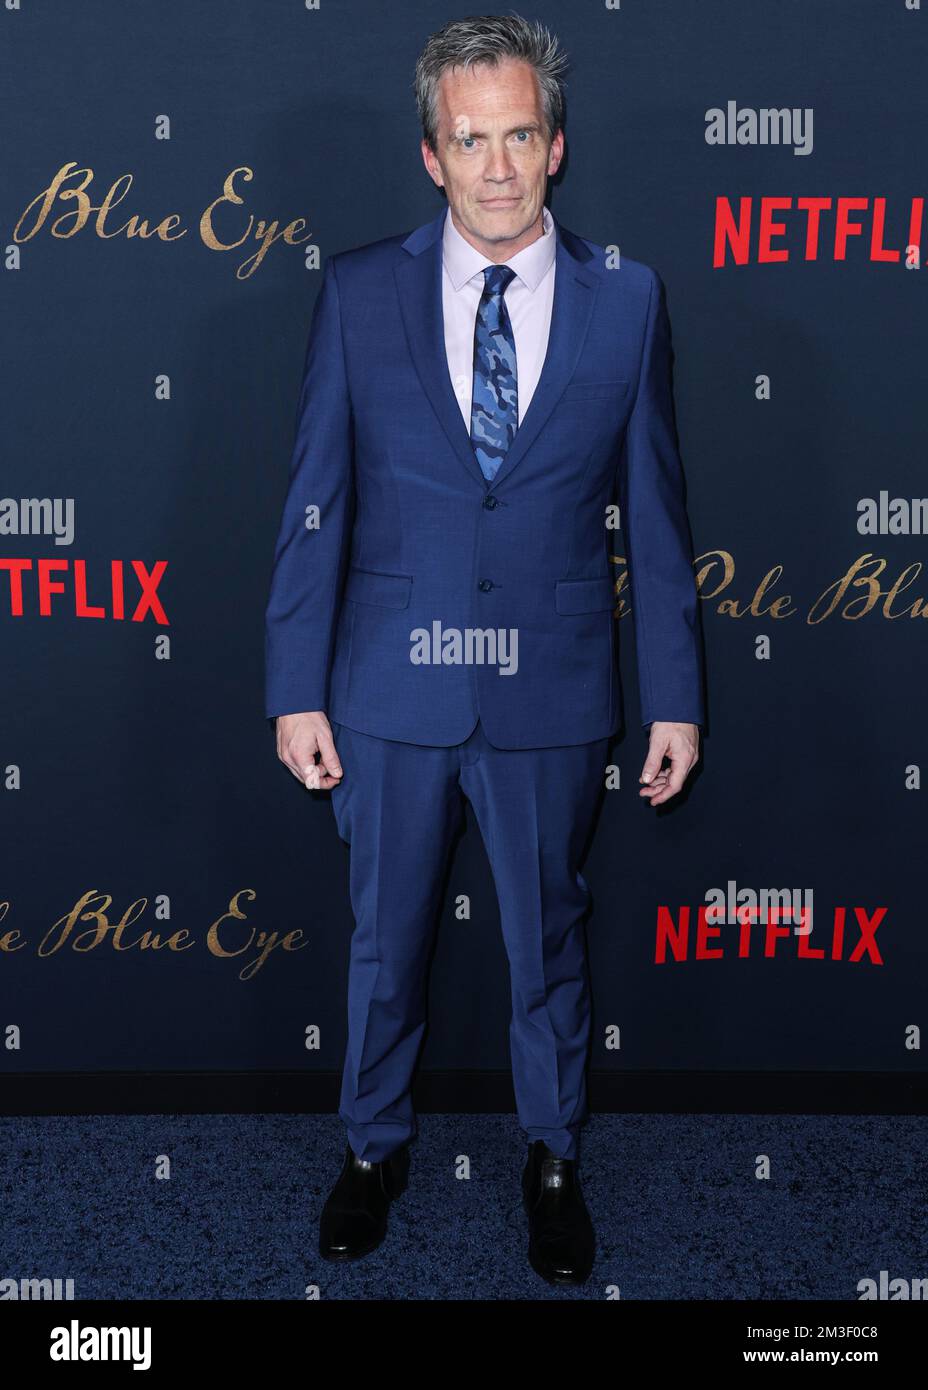 Los Angeles, USA. 14th Dec, 2022. Louis Bayard arriving to Netflix's Los  Angeles premiere of “The Pale Blue Eye” held at the Directors Guild Theatre  in Los Angeles, CA on December 14